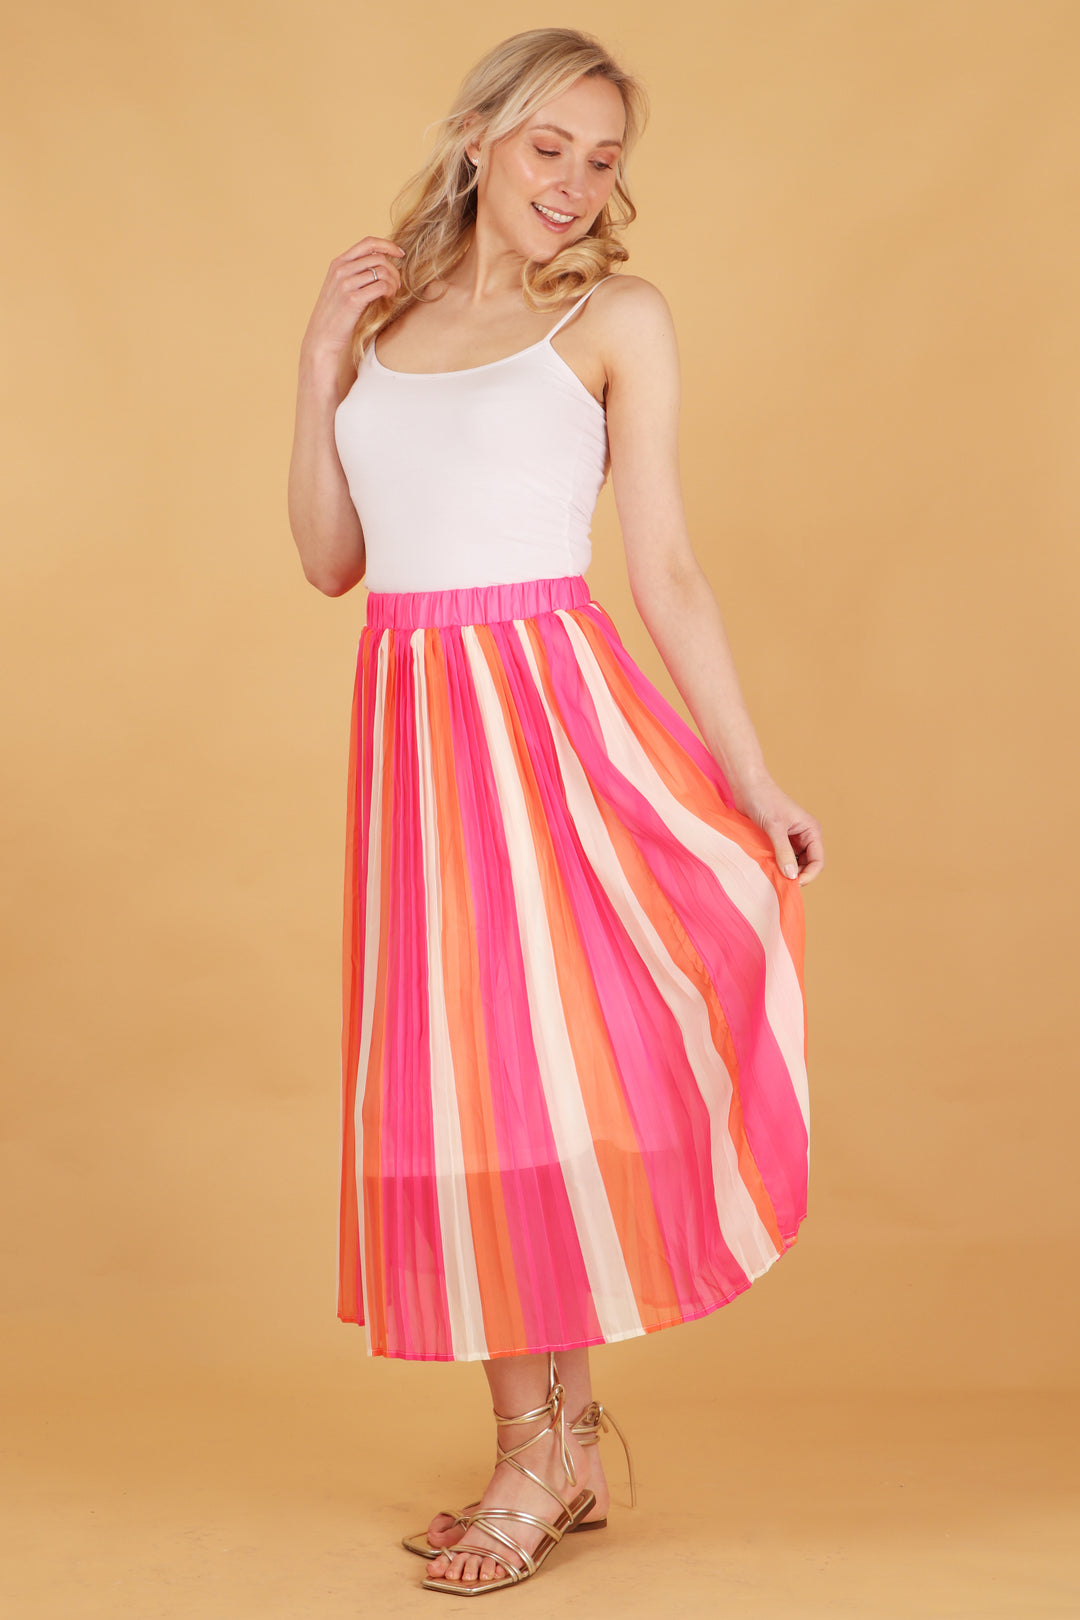 pink and coral striped pleated chiffon skirt with a pink elasticated waist